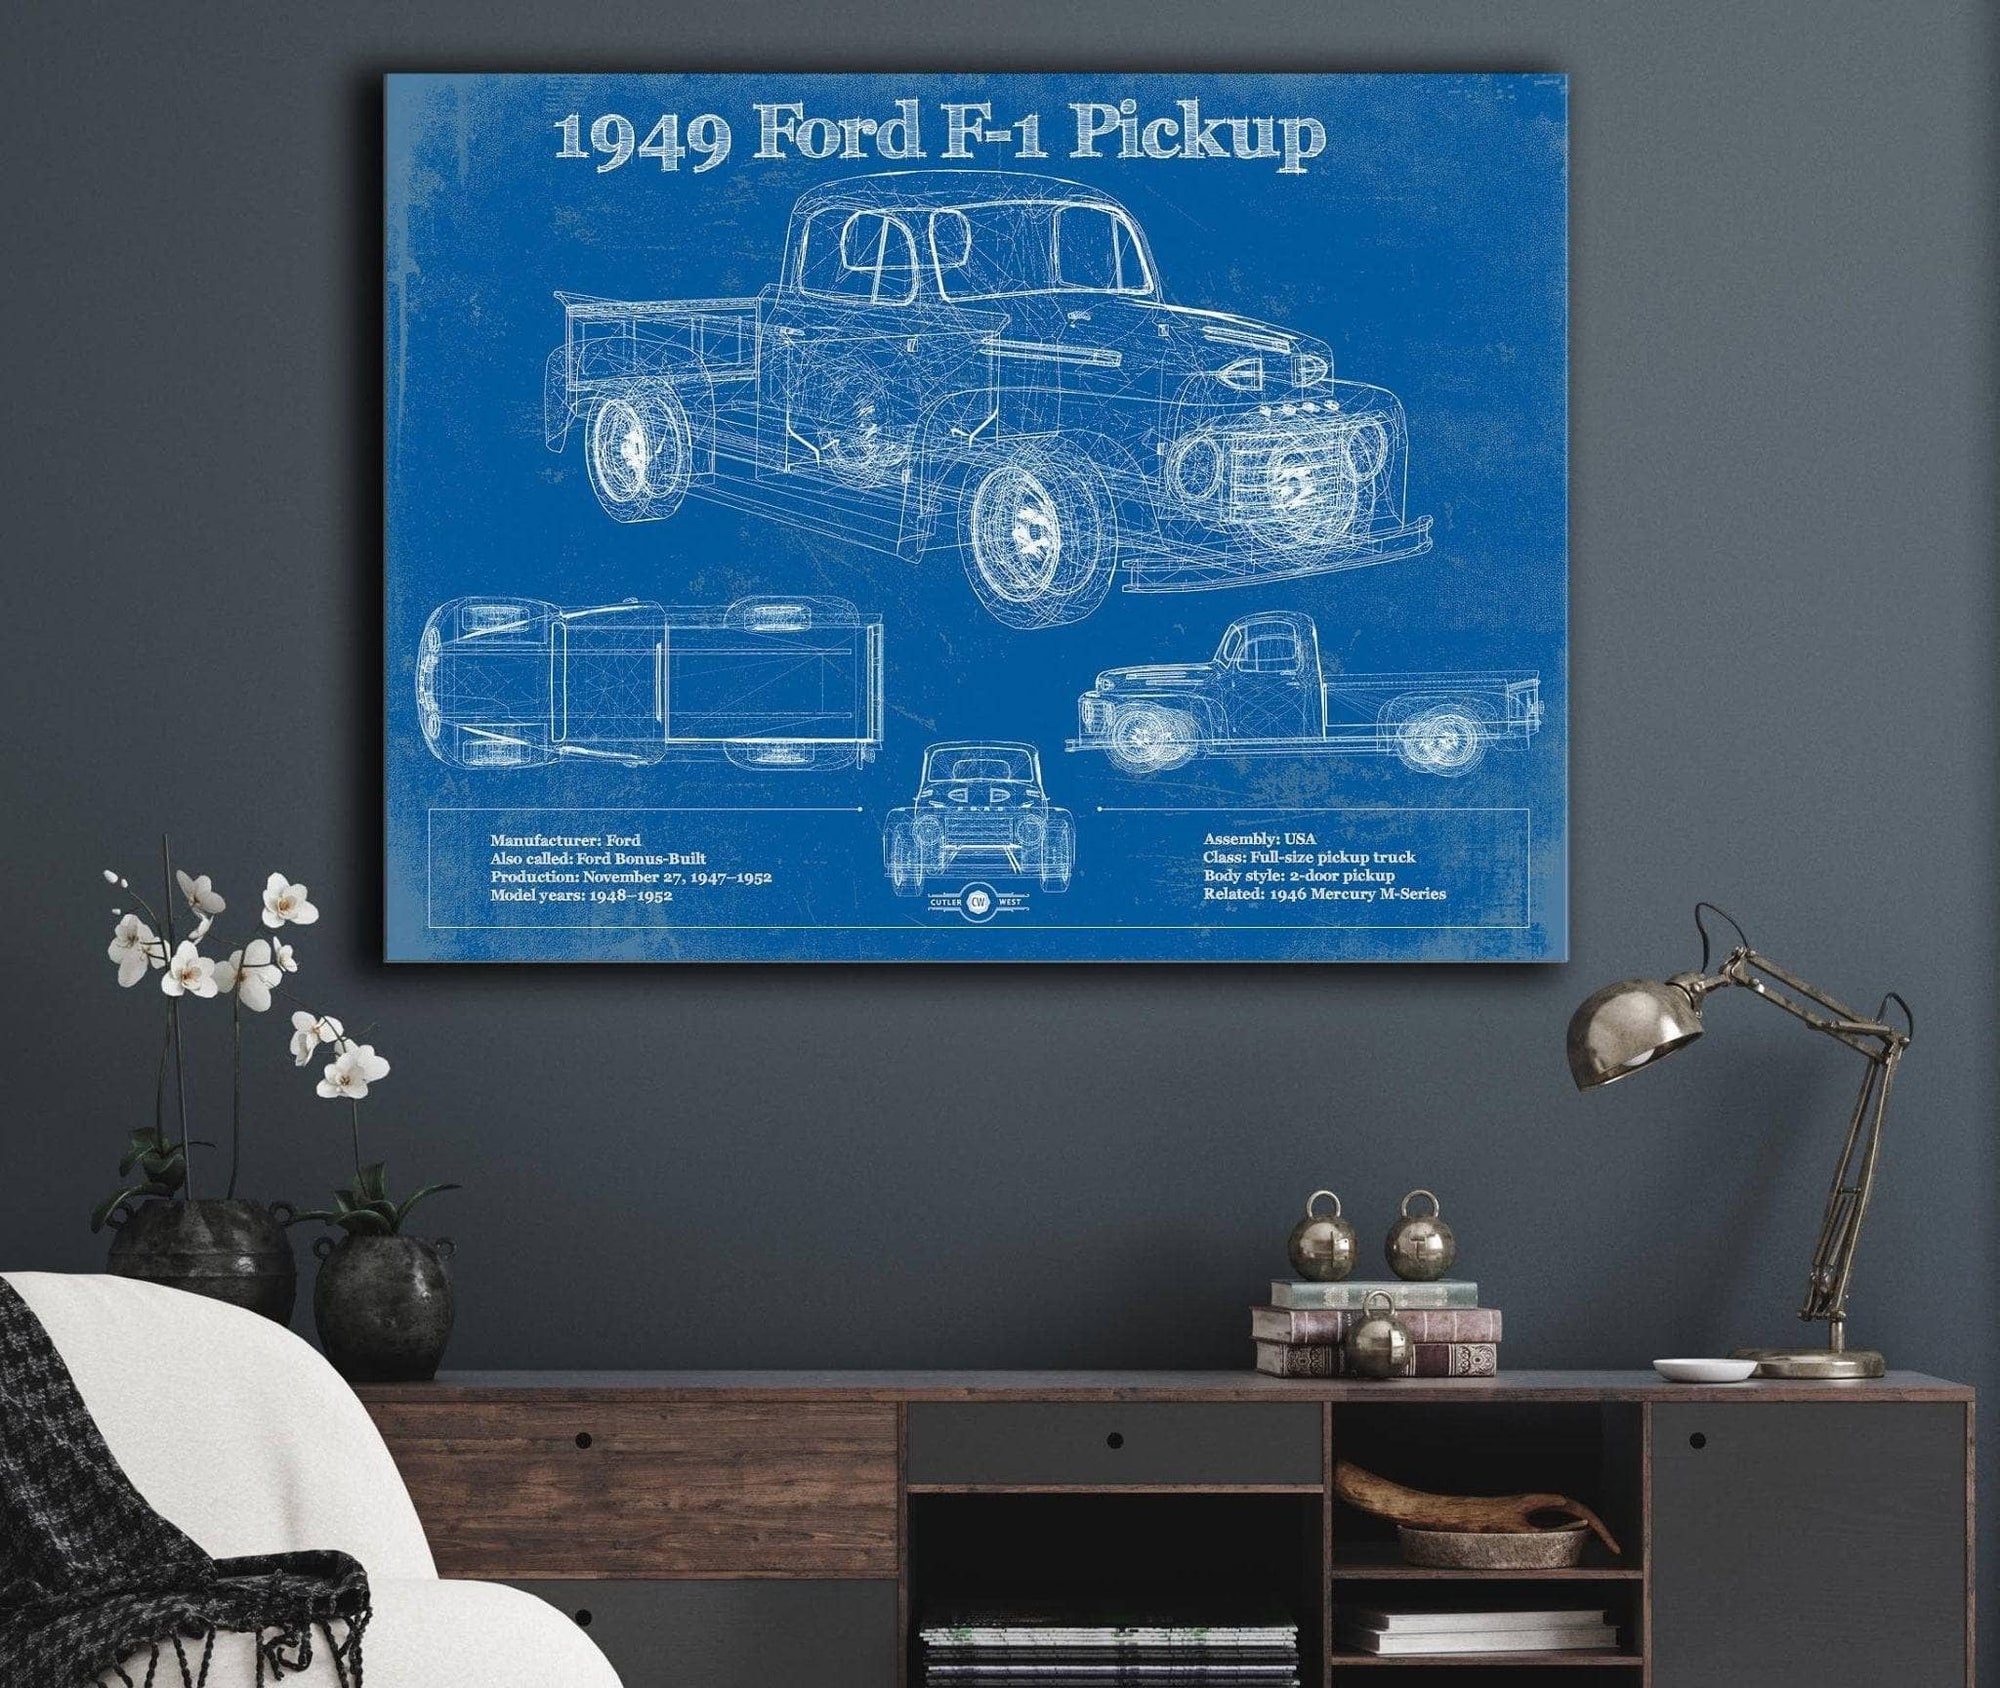 Cutler West Ford Collection 1949 Ford F-1 Pickup Vintage Blueprint Auto Print